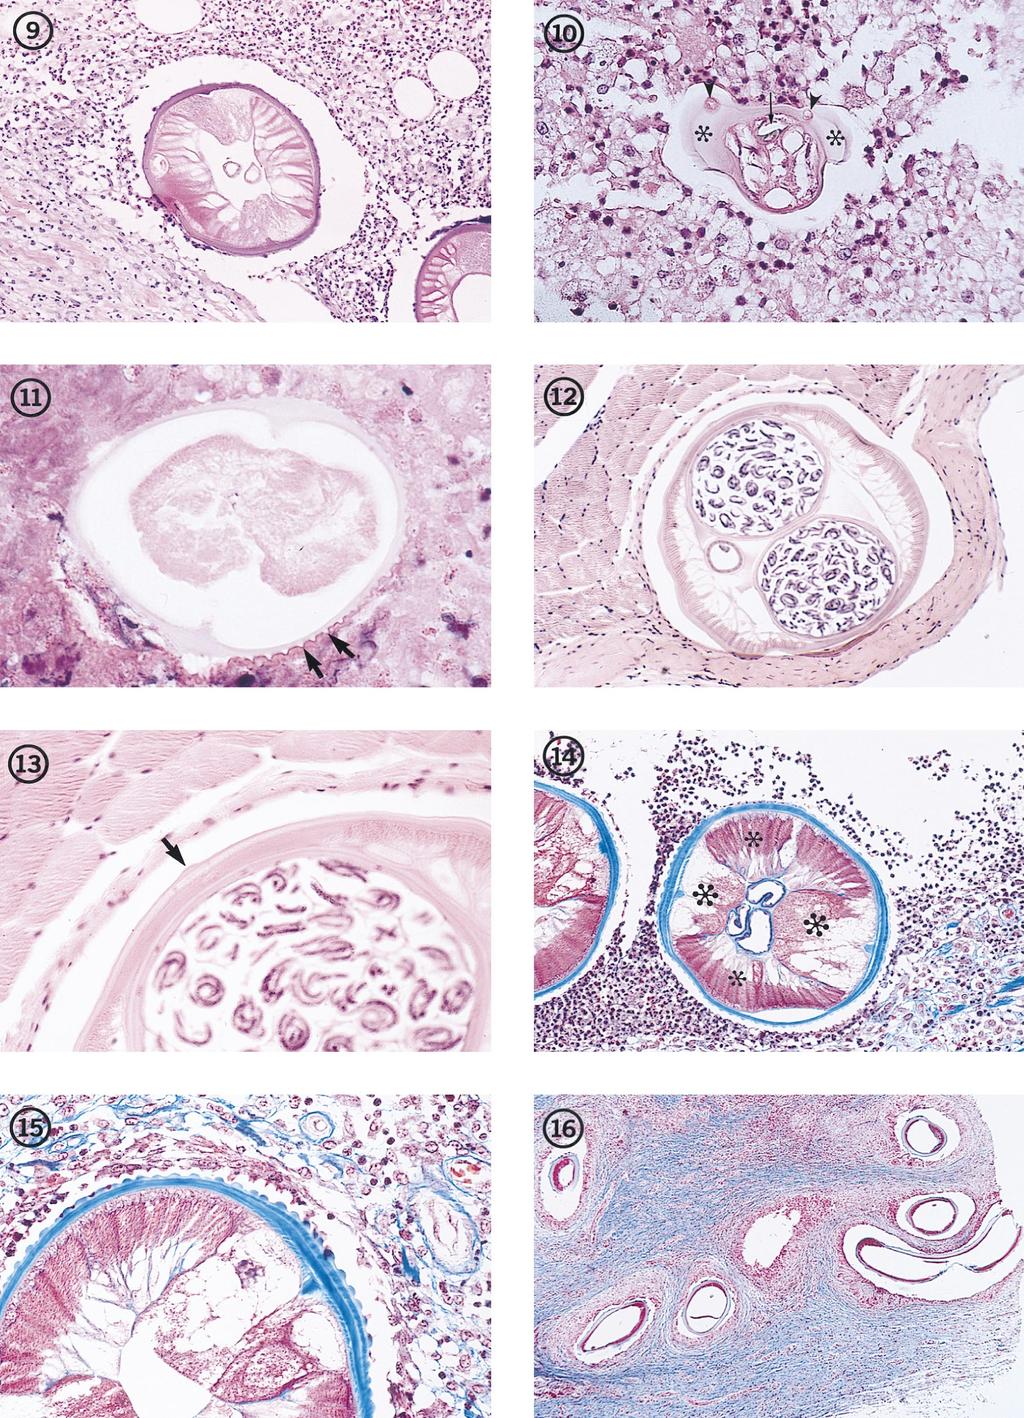 370 ORIHEL AND EBERHARD CLIN. MICROBIOL. REV. FIG. 9. Transverse section through a dead, degenerating male D. tenuis worm in human subcutaneous tissues.